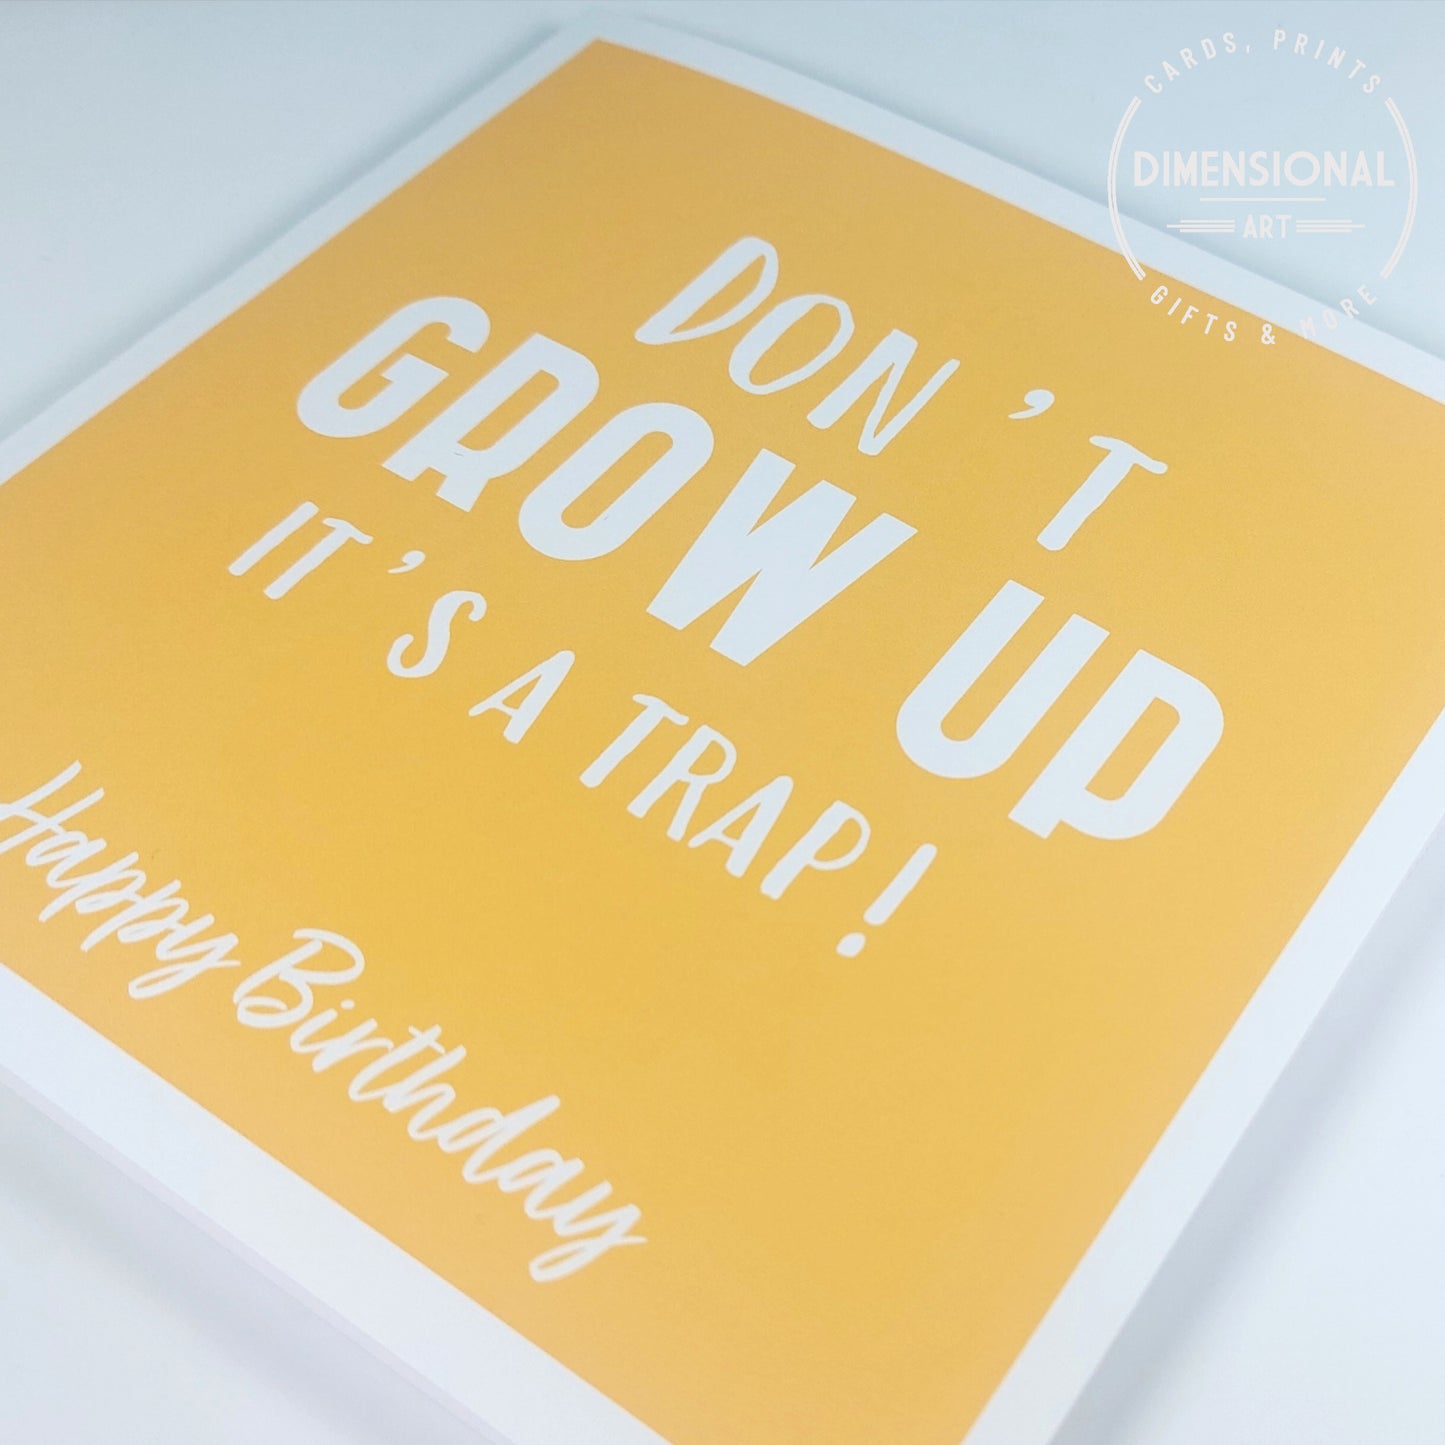 Don't grow up its a trap - Birthday Card